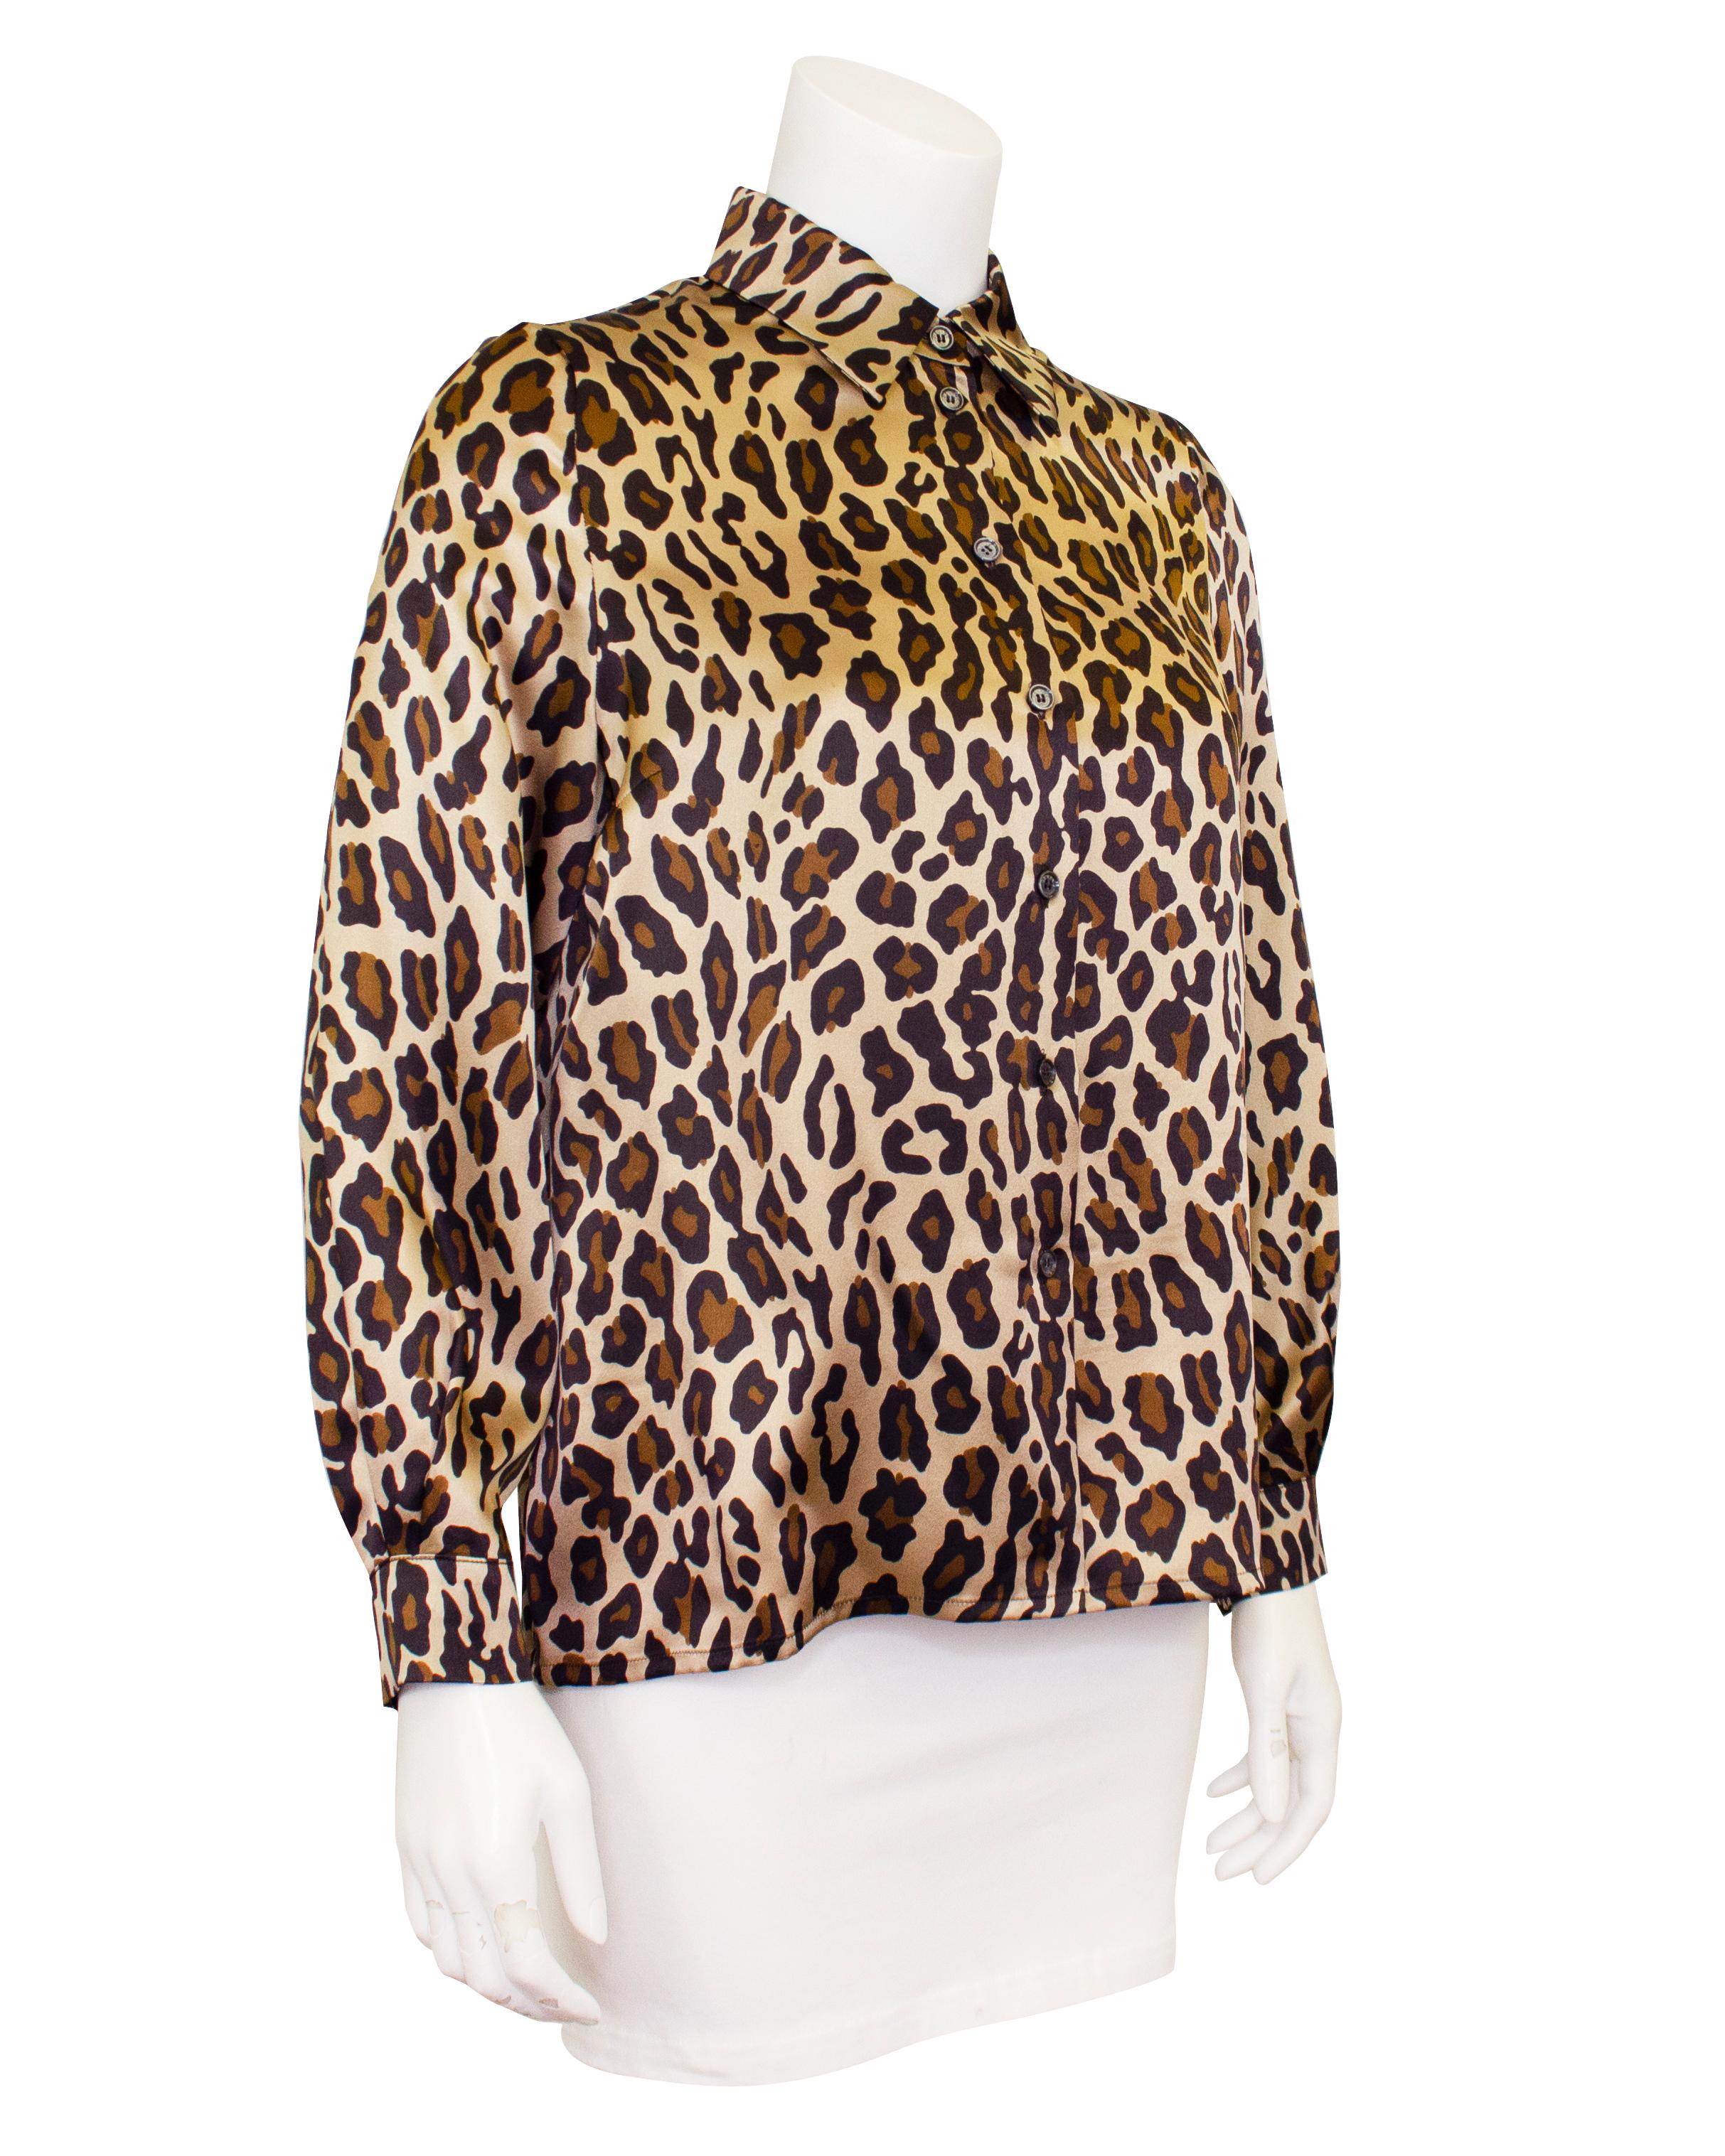 This 1990s Celine silk leopard print shirt is such a great piece. Classic button up blouse shape with cuffed sleeves and slightly loose straight cut throughout  the body. Leopard is a neutral print and this shirt can be worn in so many ways.